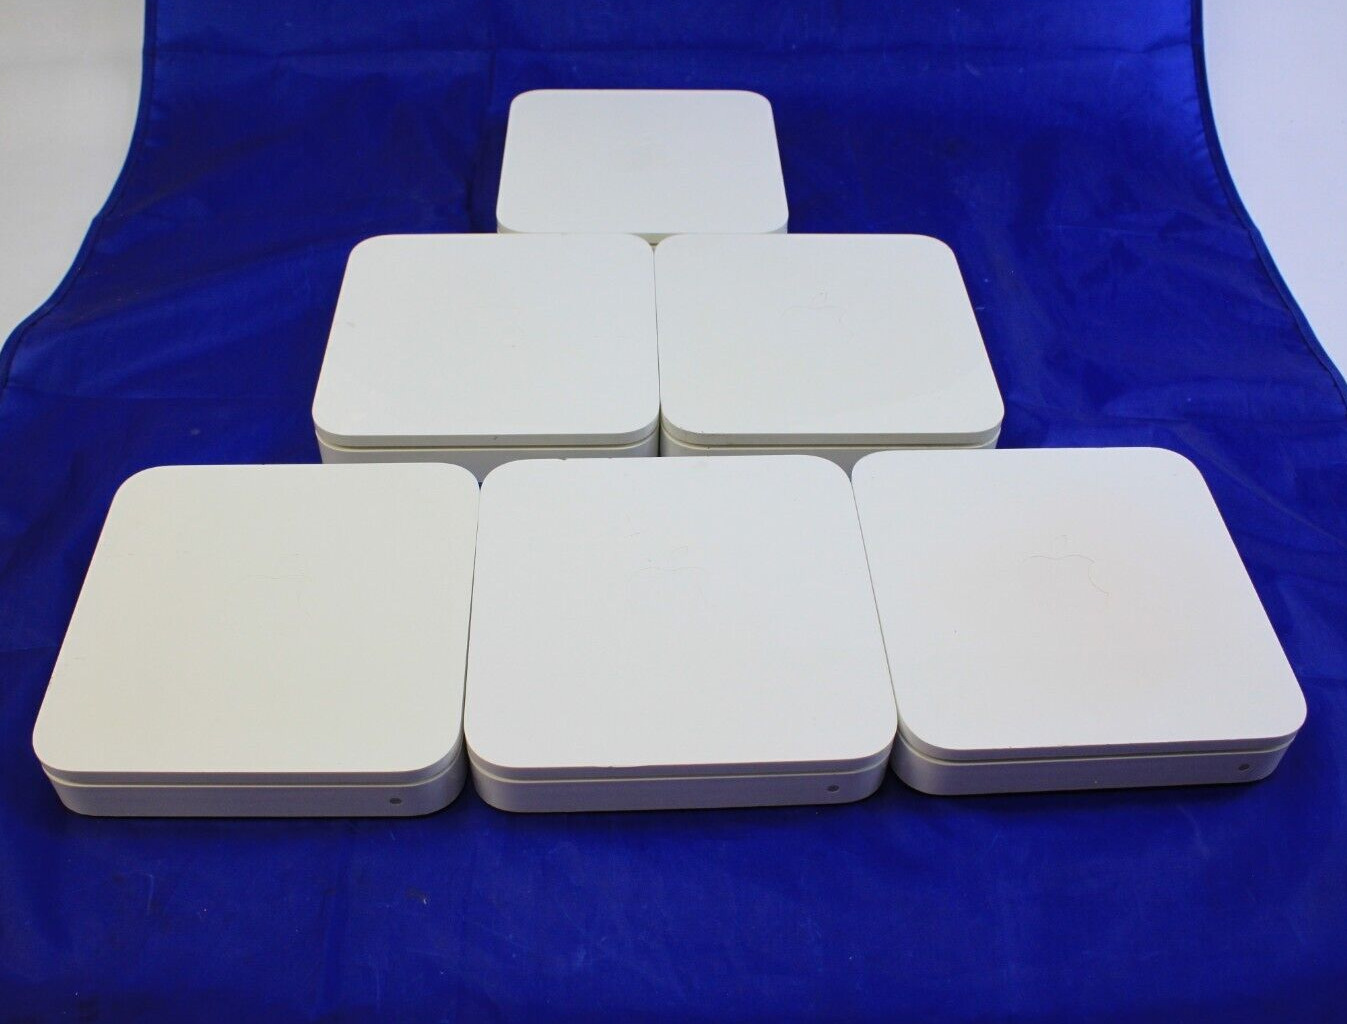 Lot of 6 Apple Airport Extreme Base Station (3) A1354 & (3) A1143 WiFi Router